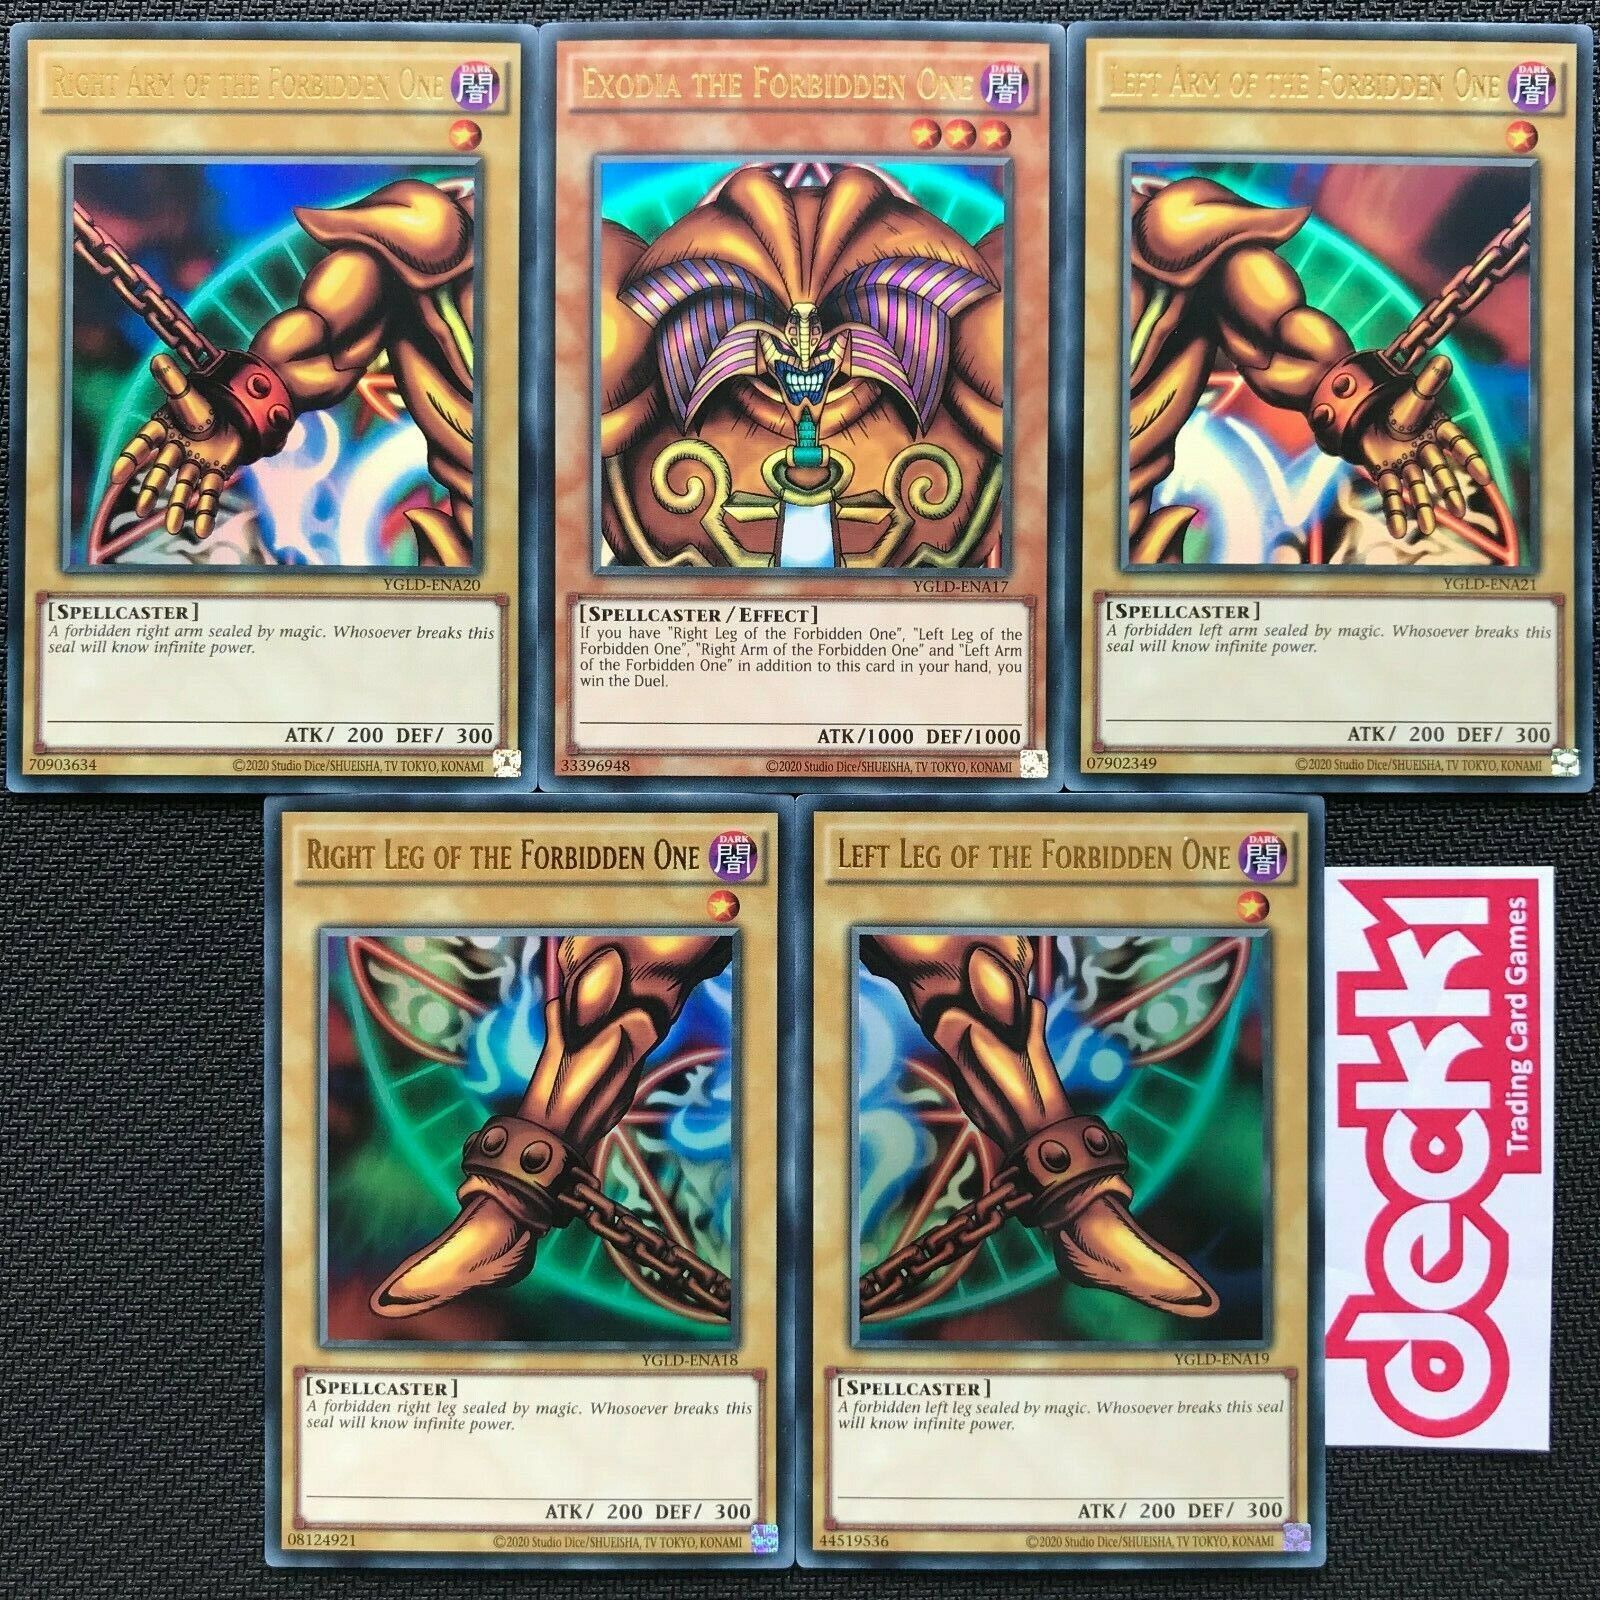 ALL 5 PIECES OF EXODIA | Exodia Forbidden One Set | Ultra Rare YGLD MINT YuGiOh